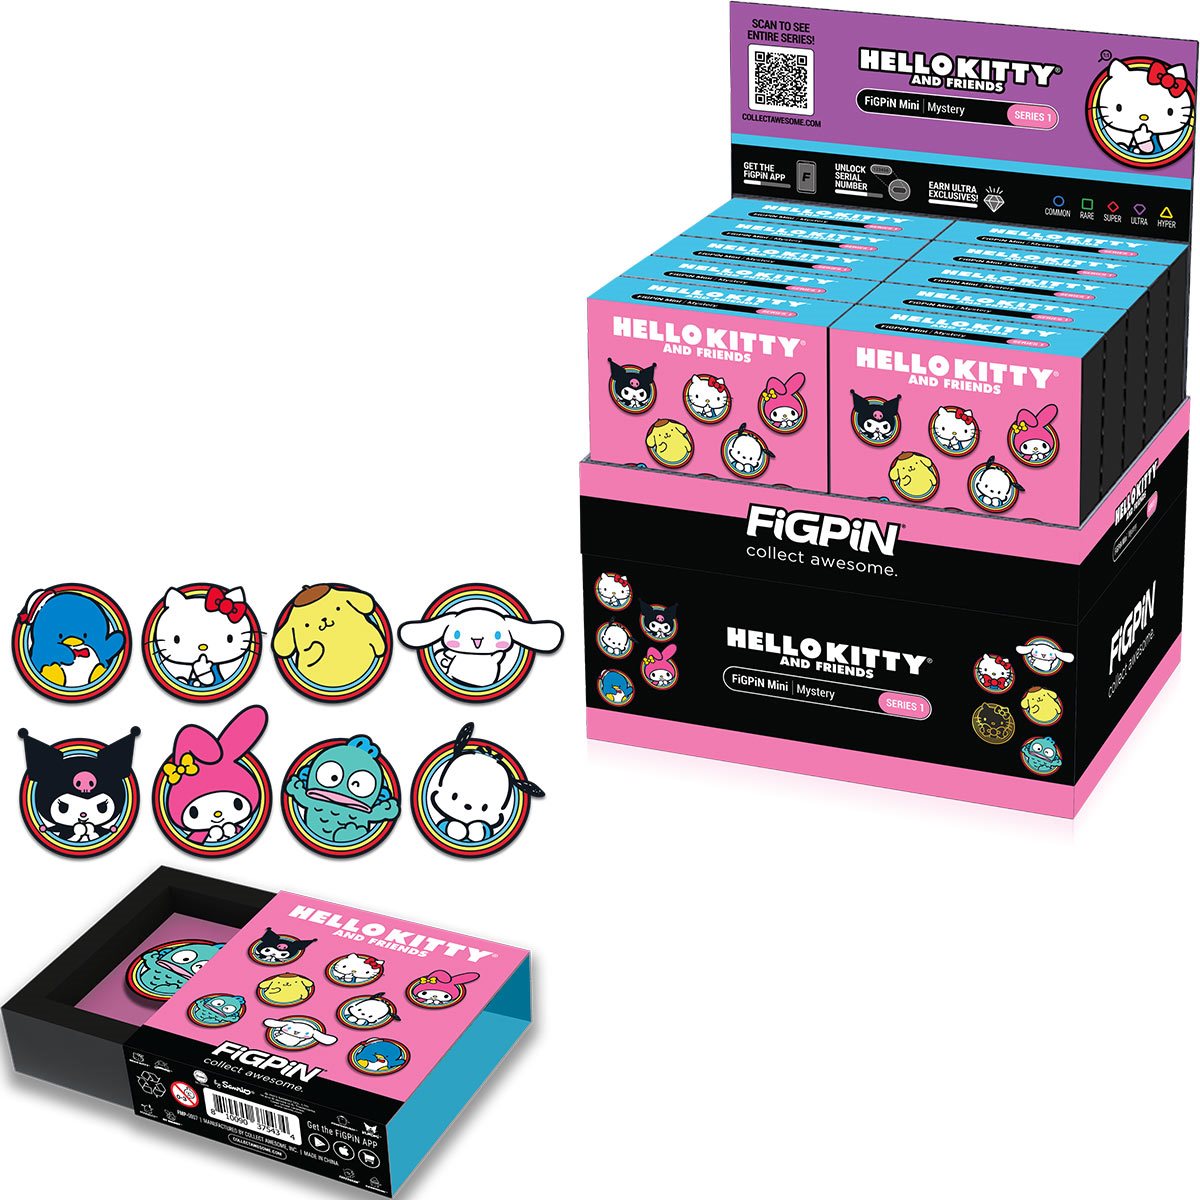 JAZWARES NAMED MASTER TOY LICENSEE FOR SANRIO GLOBAL SENSATION HELLO KITTY  AND FRIENDS IN NORTH AMERICA